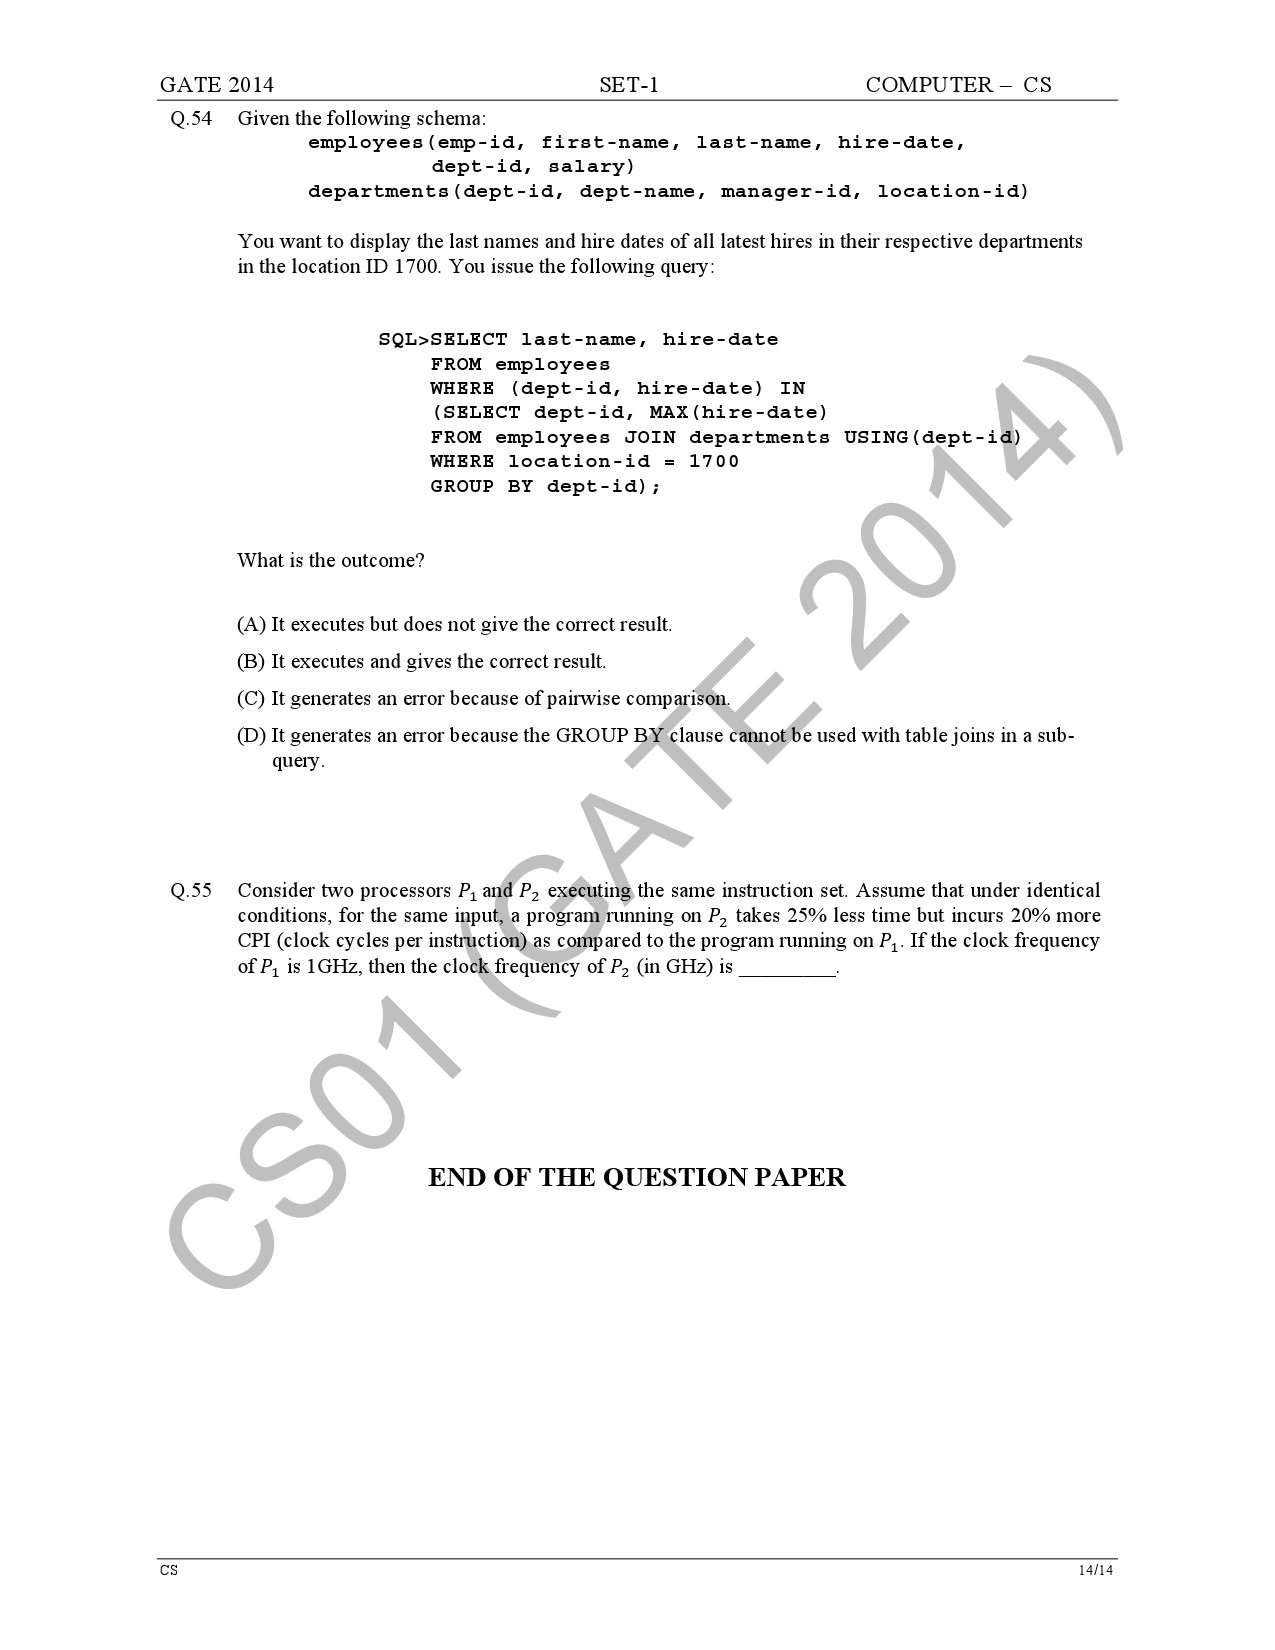 GATE Exam Question Paper 2014 Computer Science and Information Technology Set 1 20